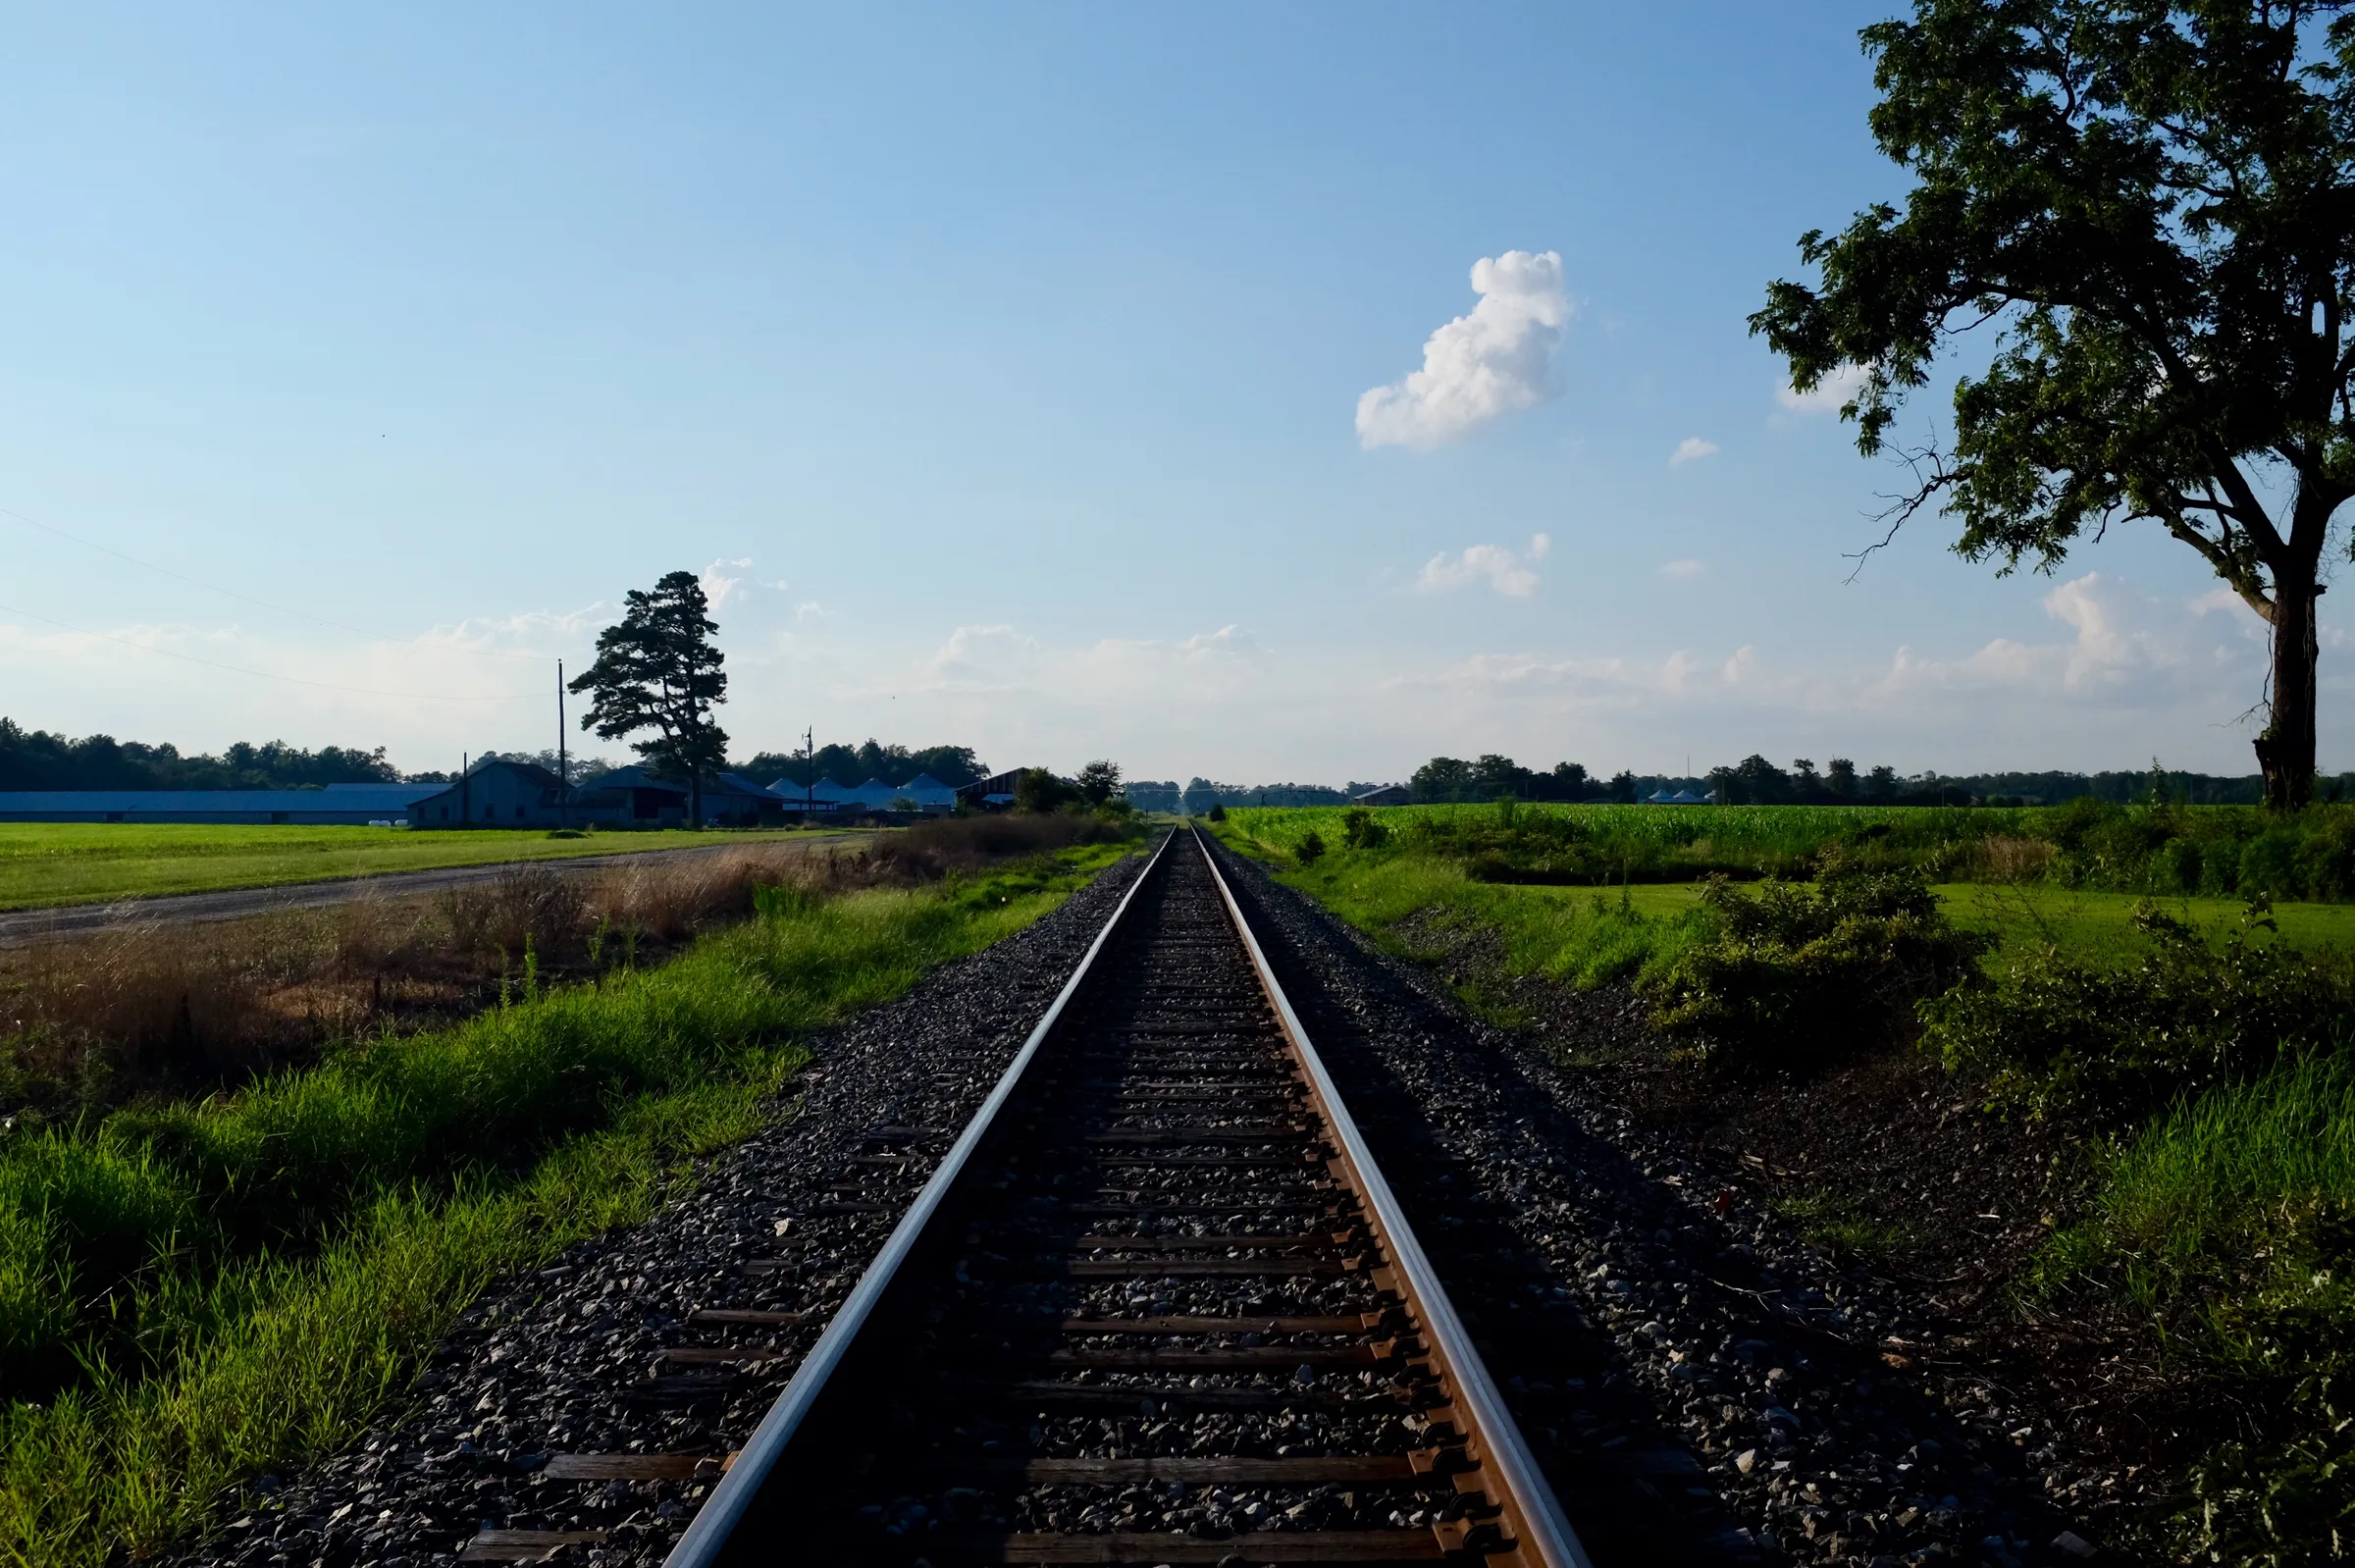 Train tracks looking north, disappearing in the distance with gray stones and green grass on either side, trees and farm buildings near the horizon.